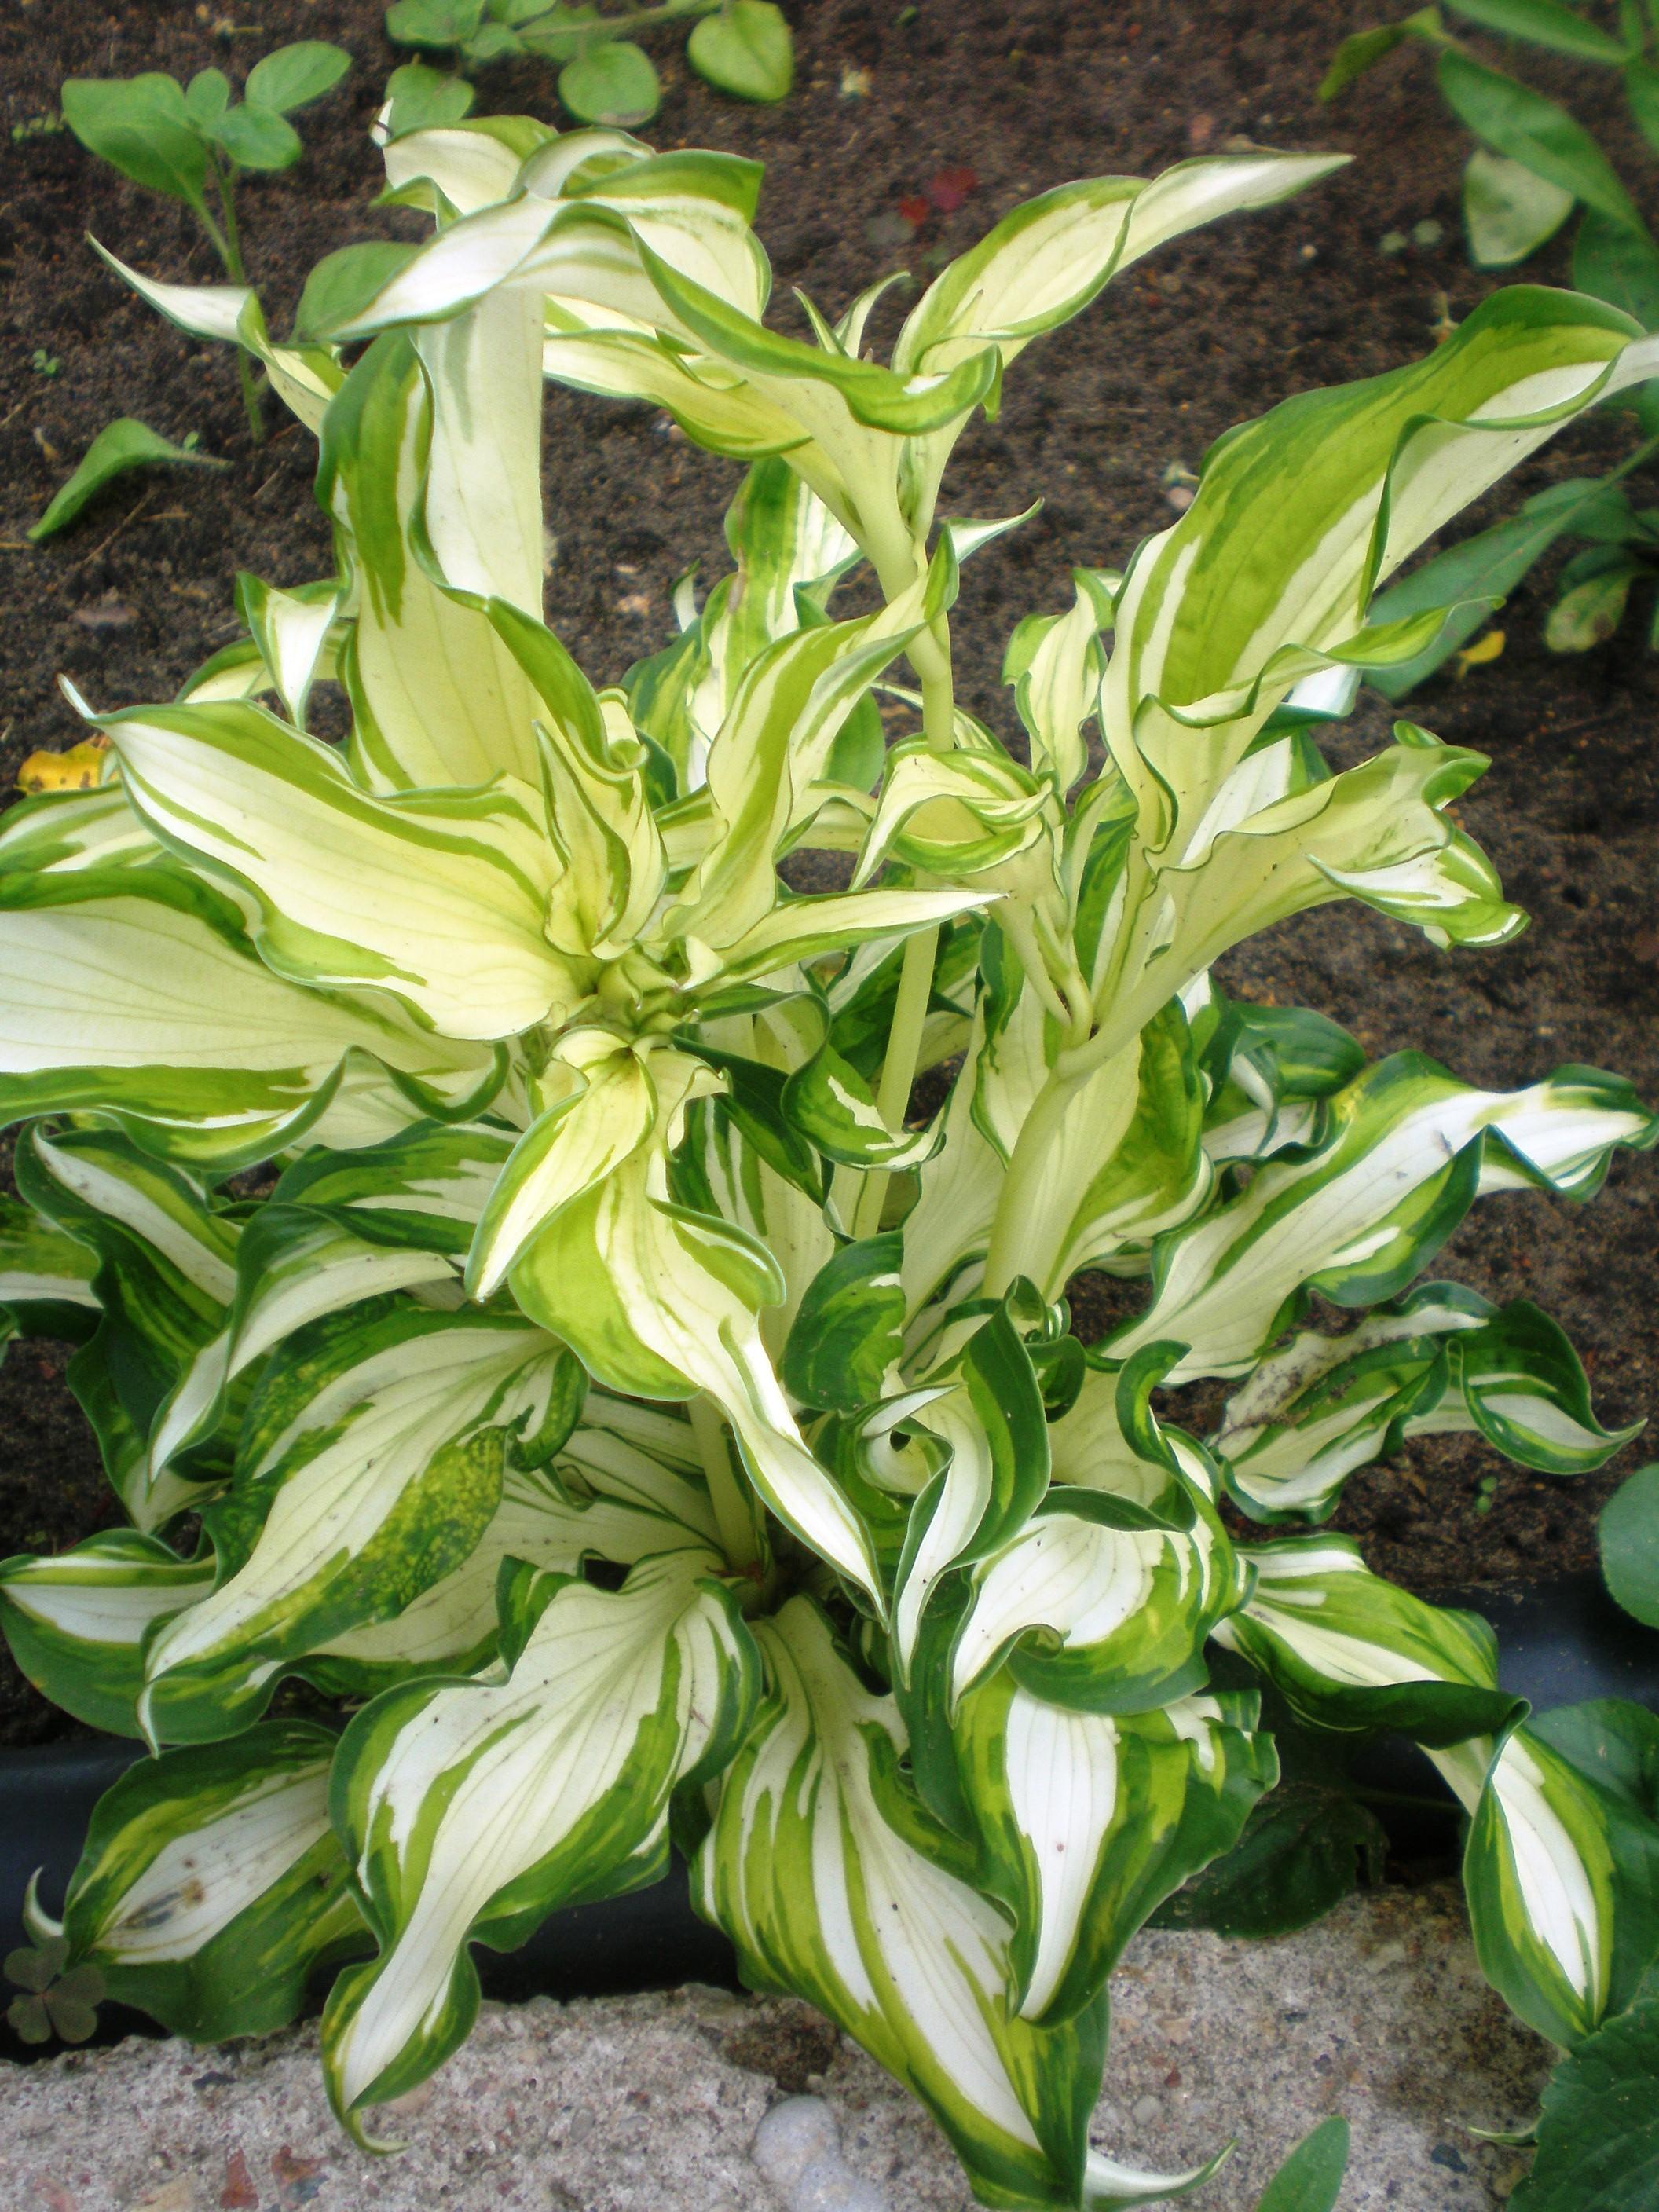 Yellow-green leaves with yellow stems.